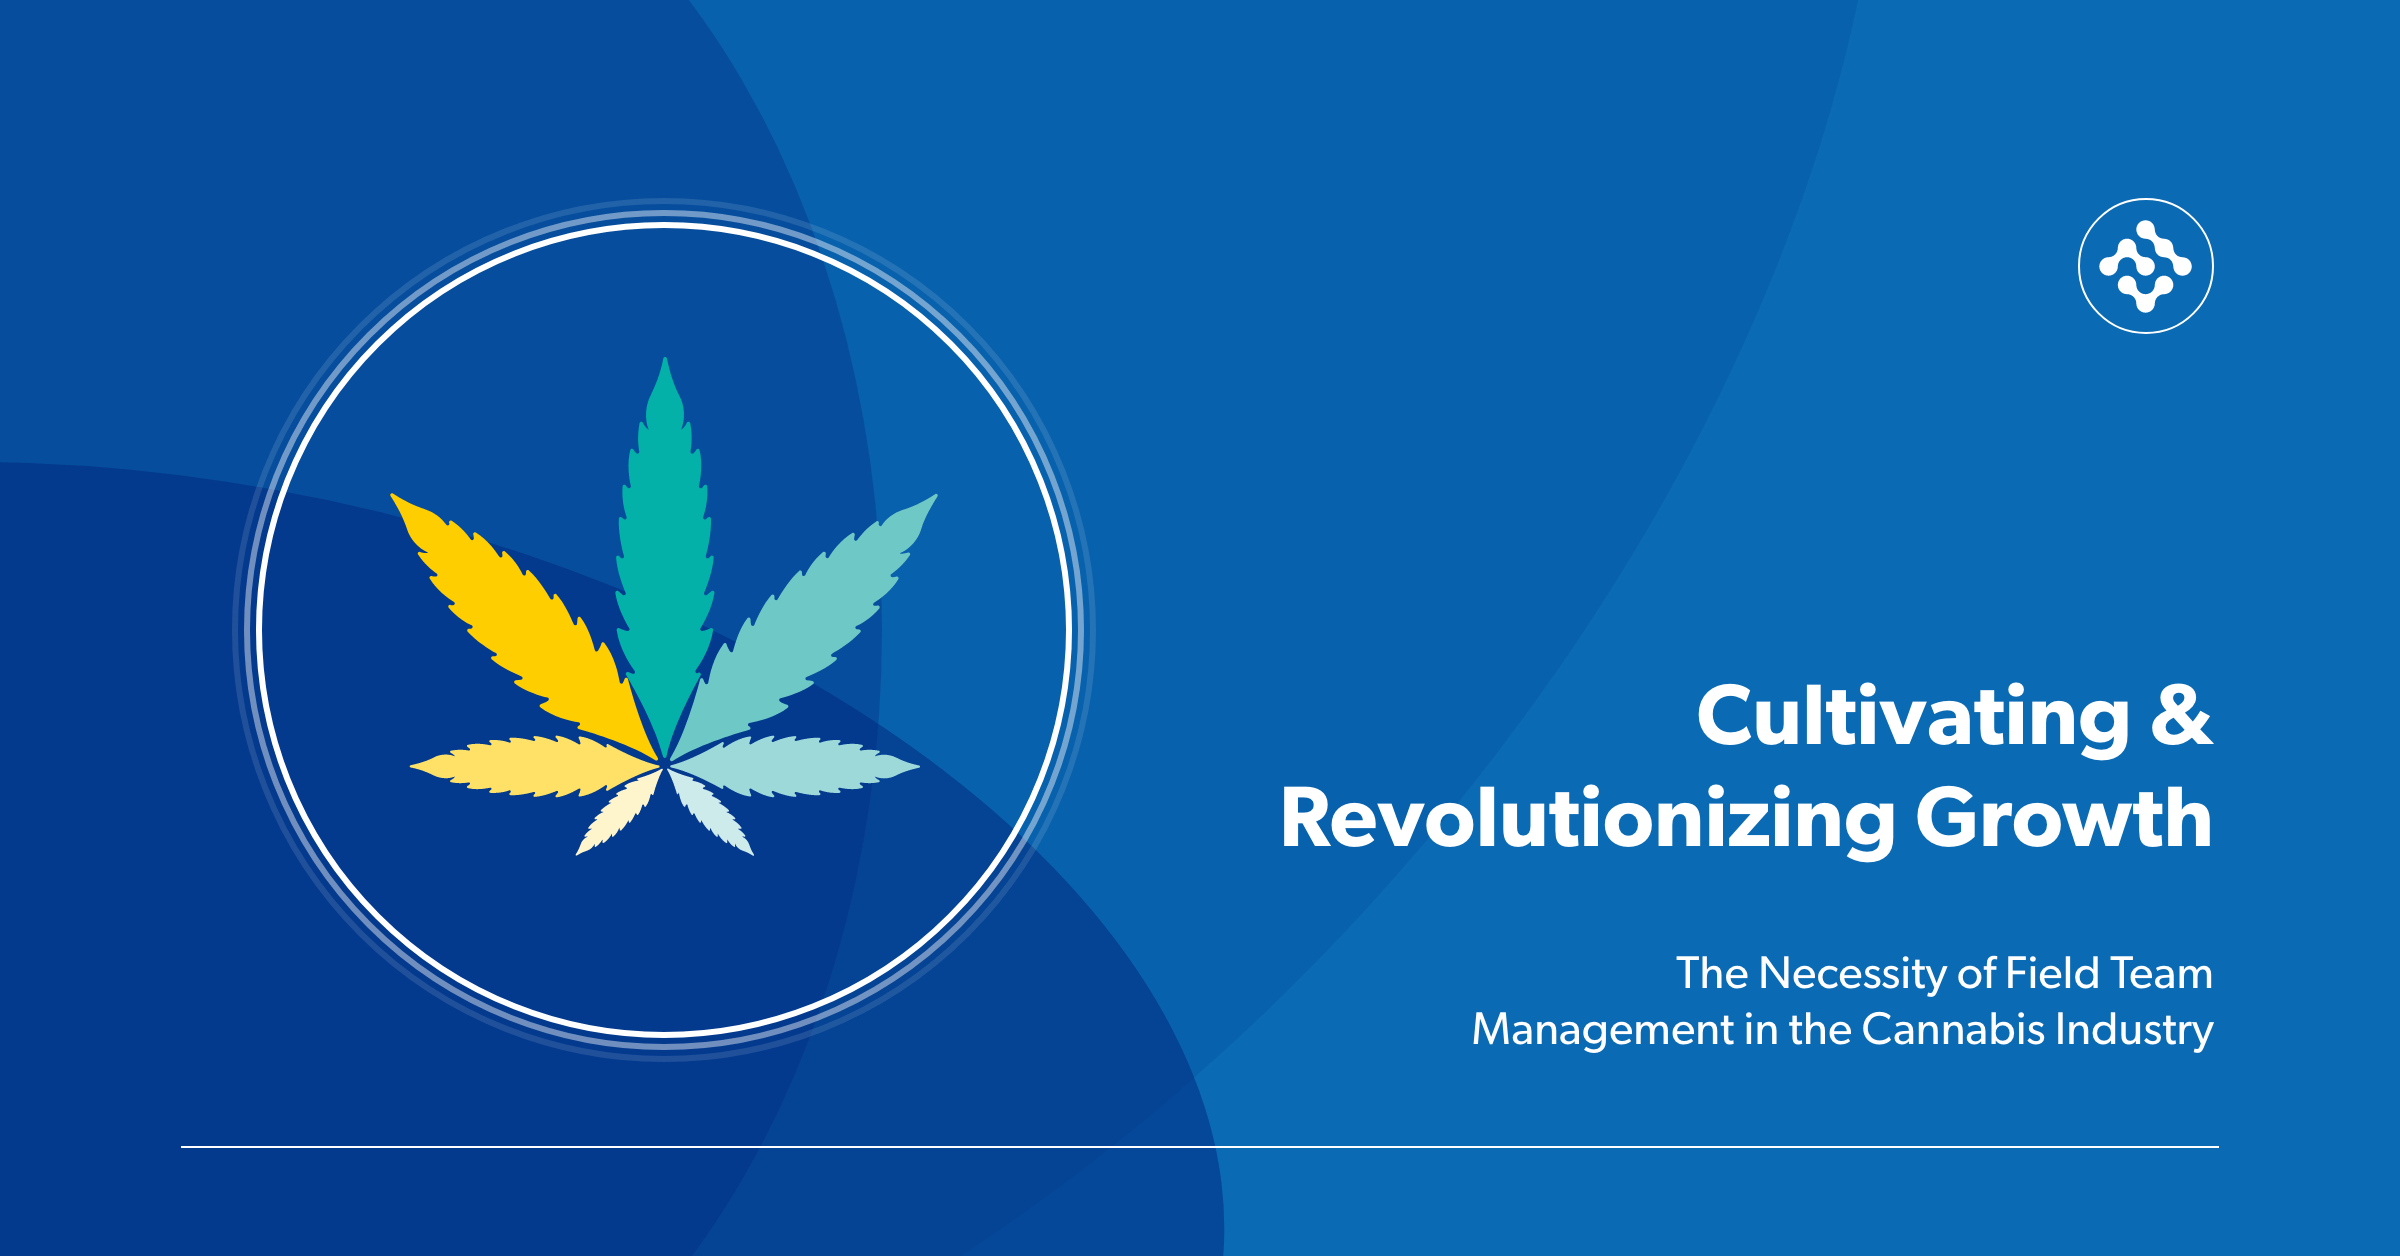 The Necessity of Field Team Management in the Cannabis Industry